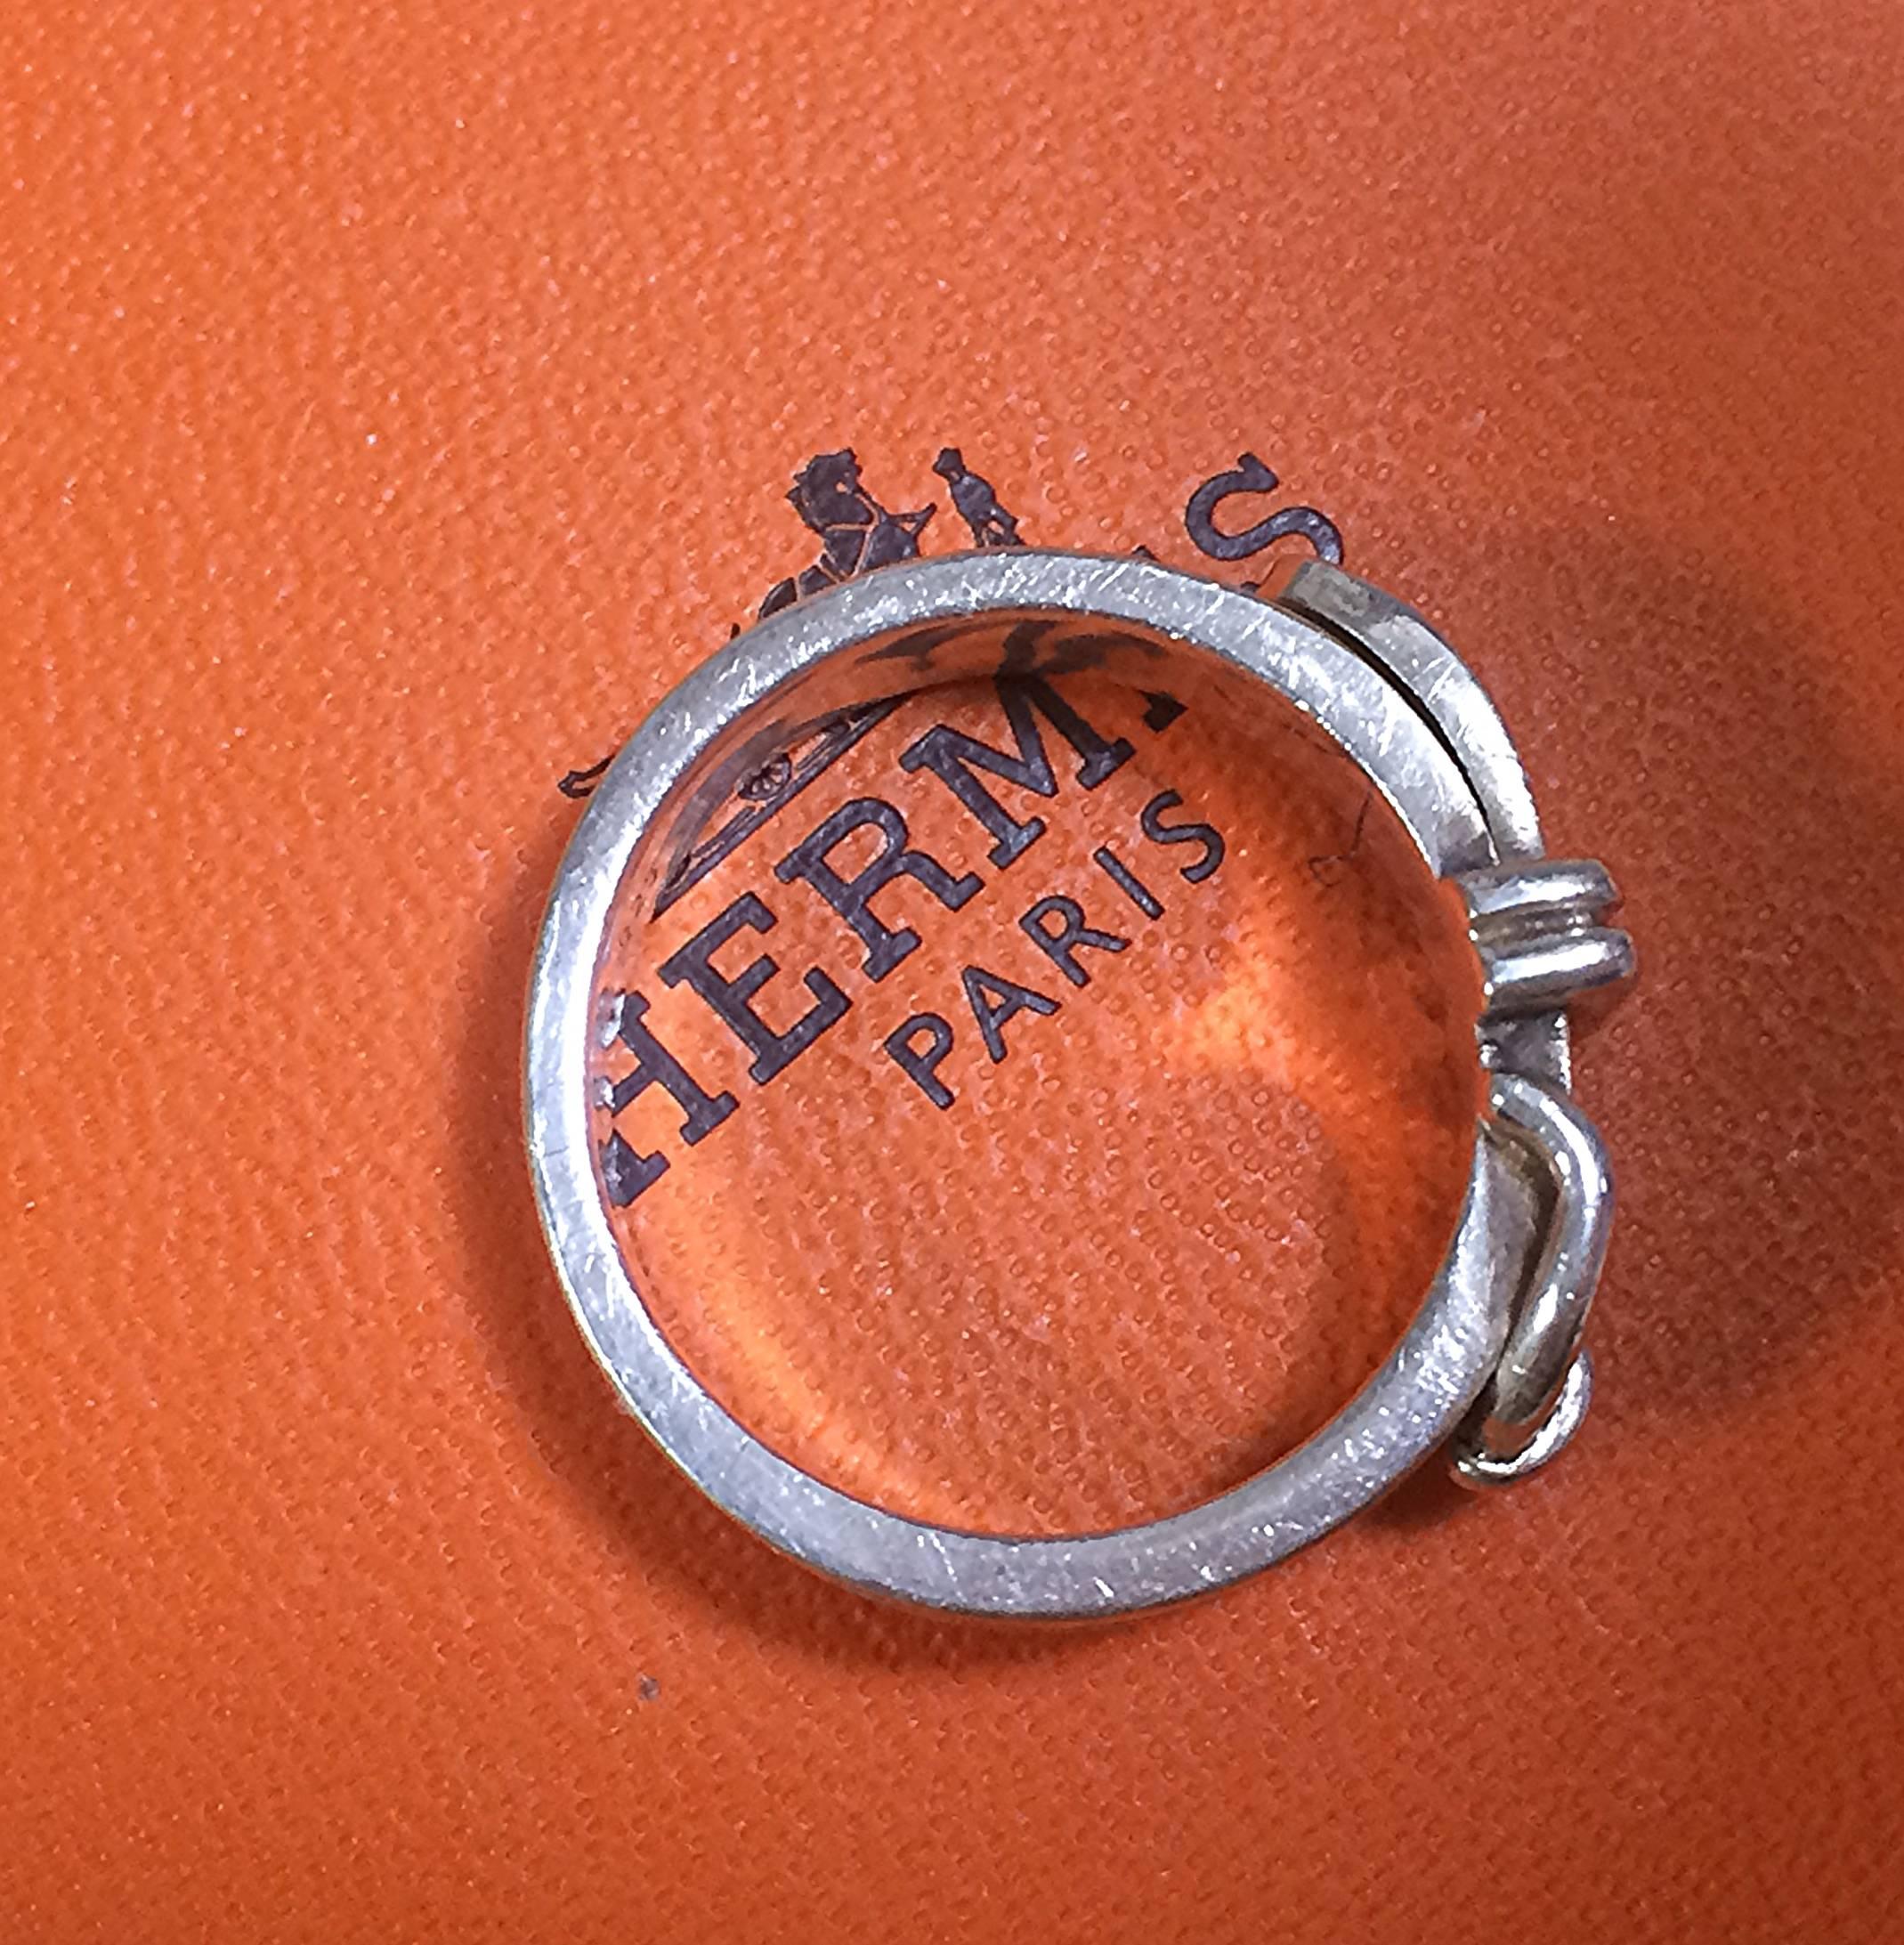 Vintage Hermes genuine 925 silver ring, classic buckle design with original box  2